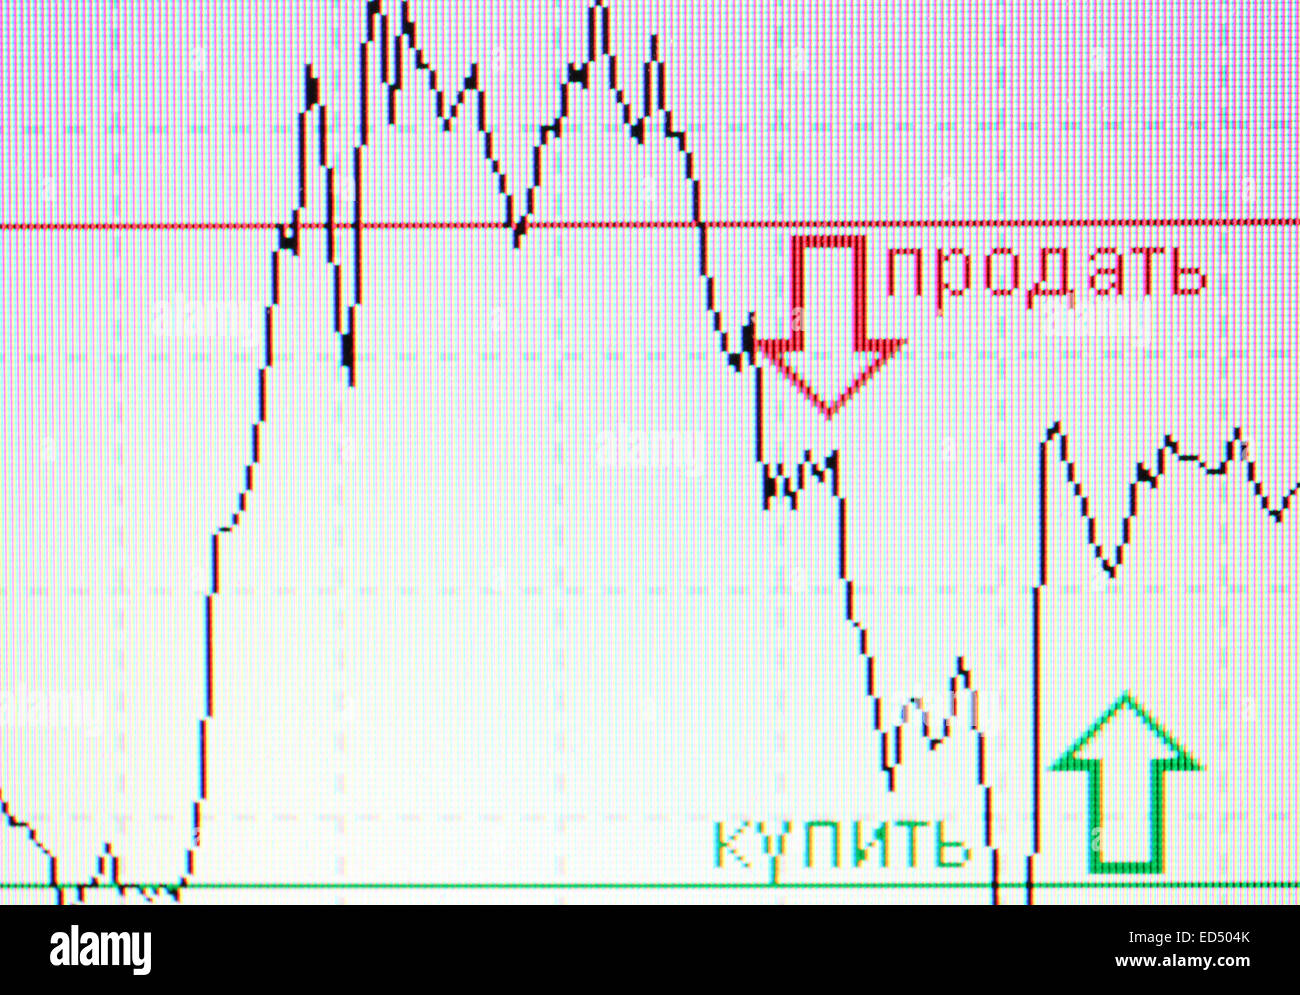 Foreign Exchange Market Chart